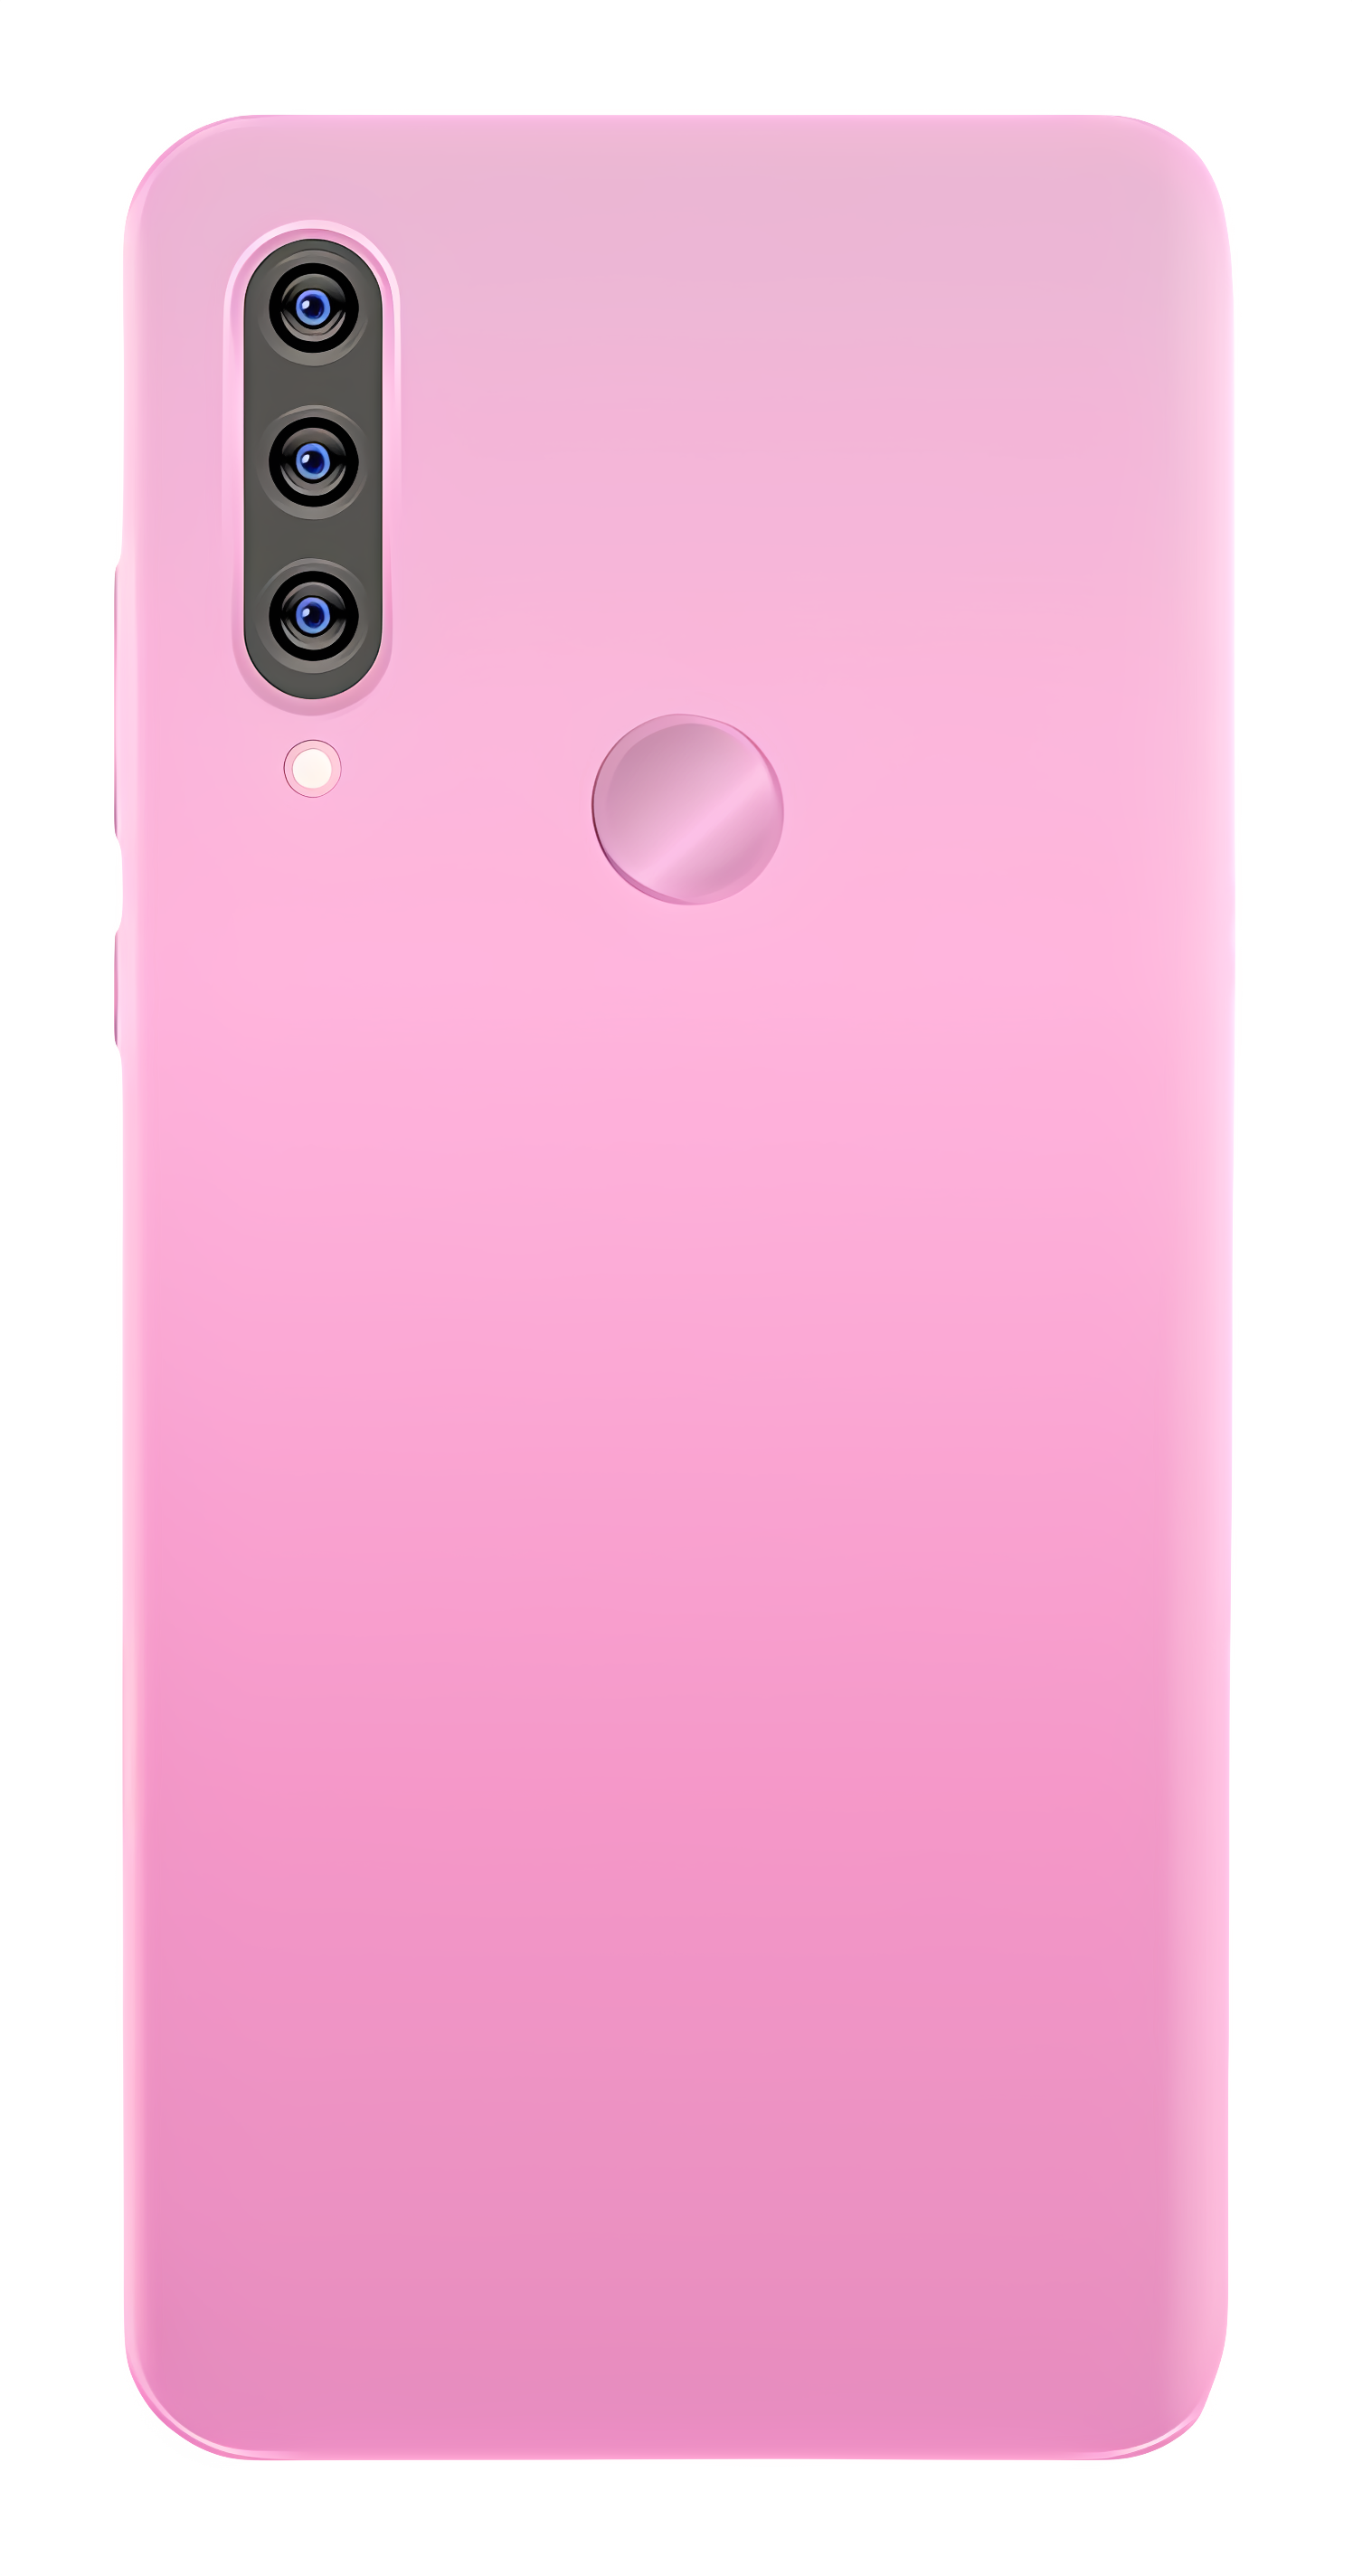 Luxury pink cell phone with metallic finish Clipart